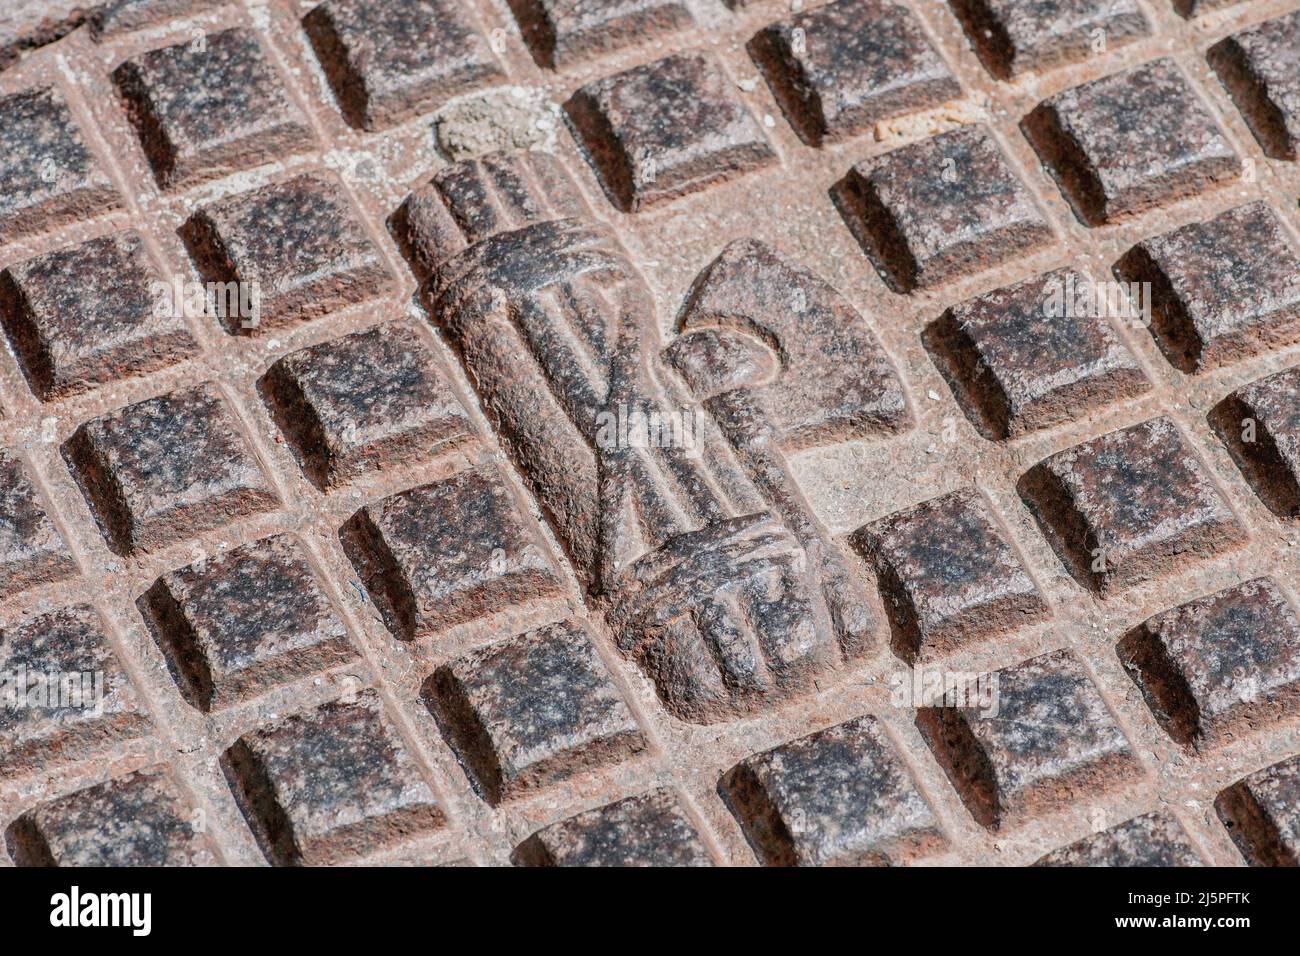 Faded symbol of Fascism on a manhole of the sewer or water system, Mottola, Puglia, Italy Stock Photo